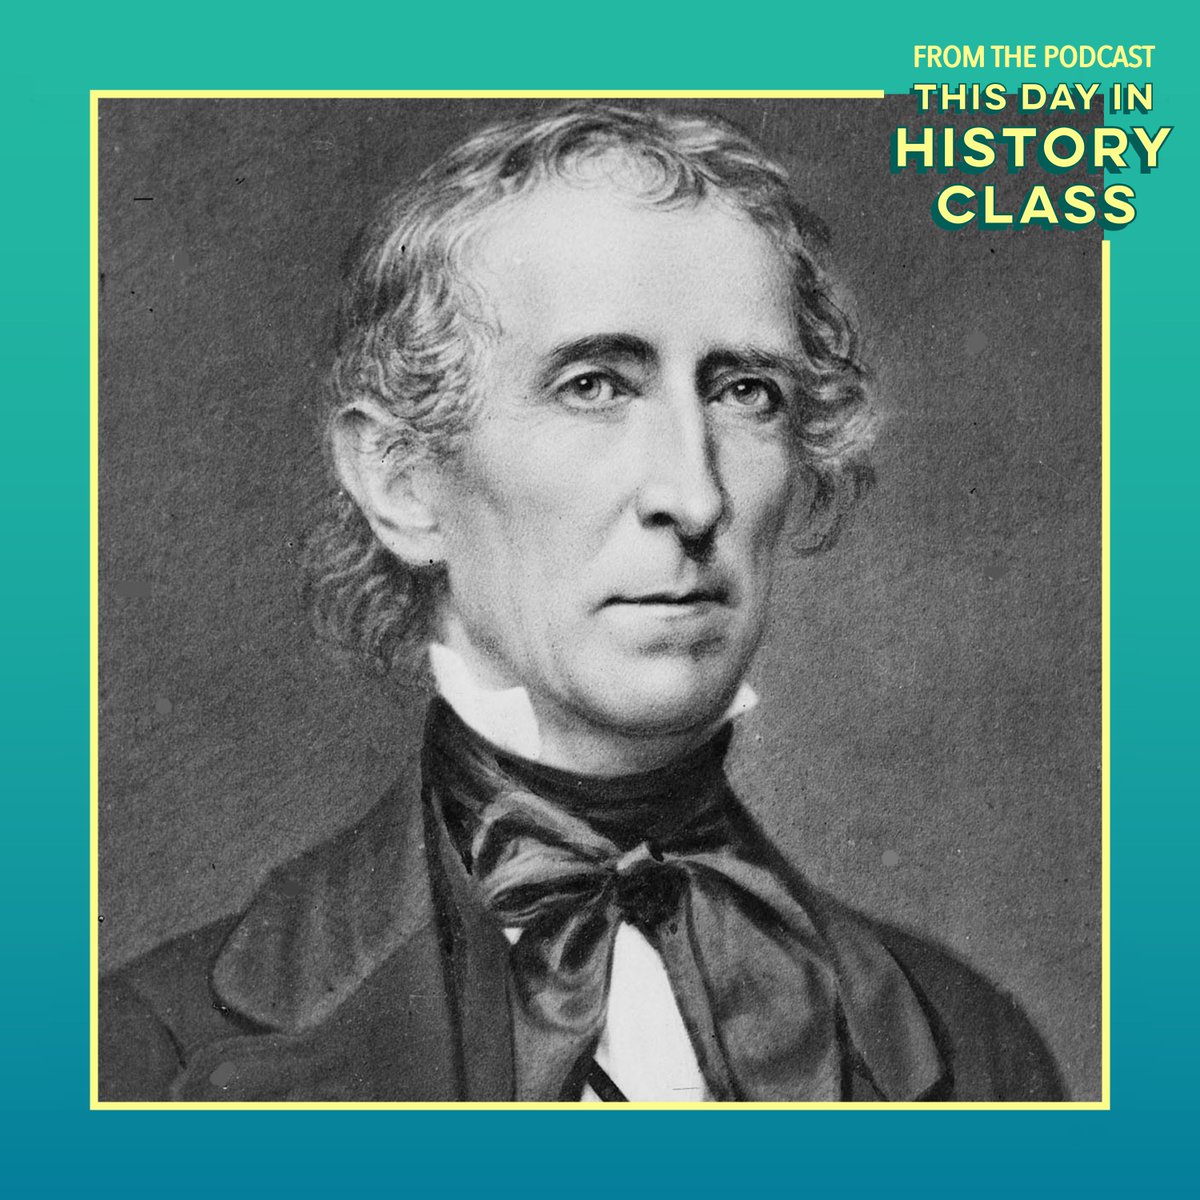 On this day in 1844, an American naval cannon exploded during a peacetime demonstration.

#USSPrinceton #Disaster #Cannon #Explosion #JohnTyler #USNavy #Peacemaker #Princeton #TDIHC #ThisDayInHistory #TodayInHistory #OnThisDay #February28

Listen now:
omny.fm/shows/this-day…